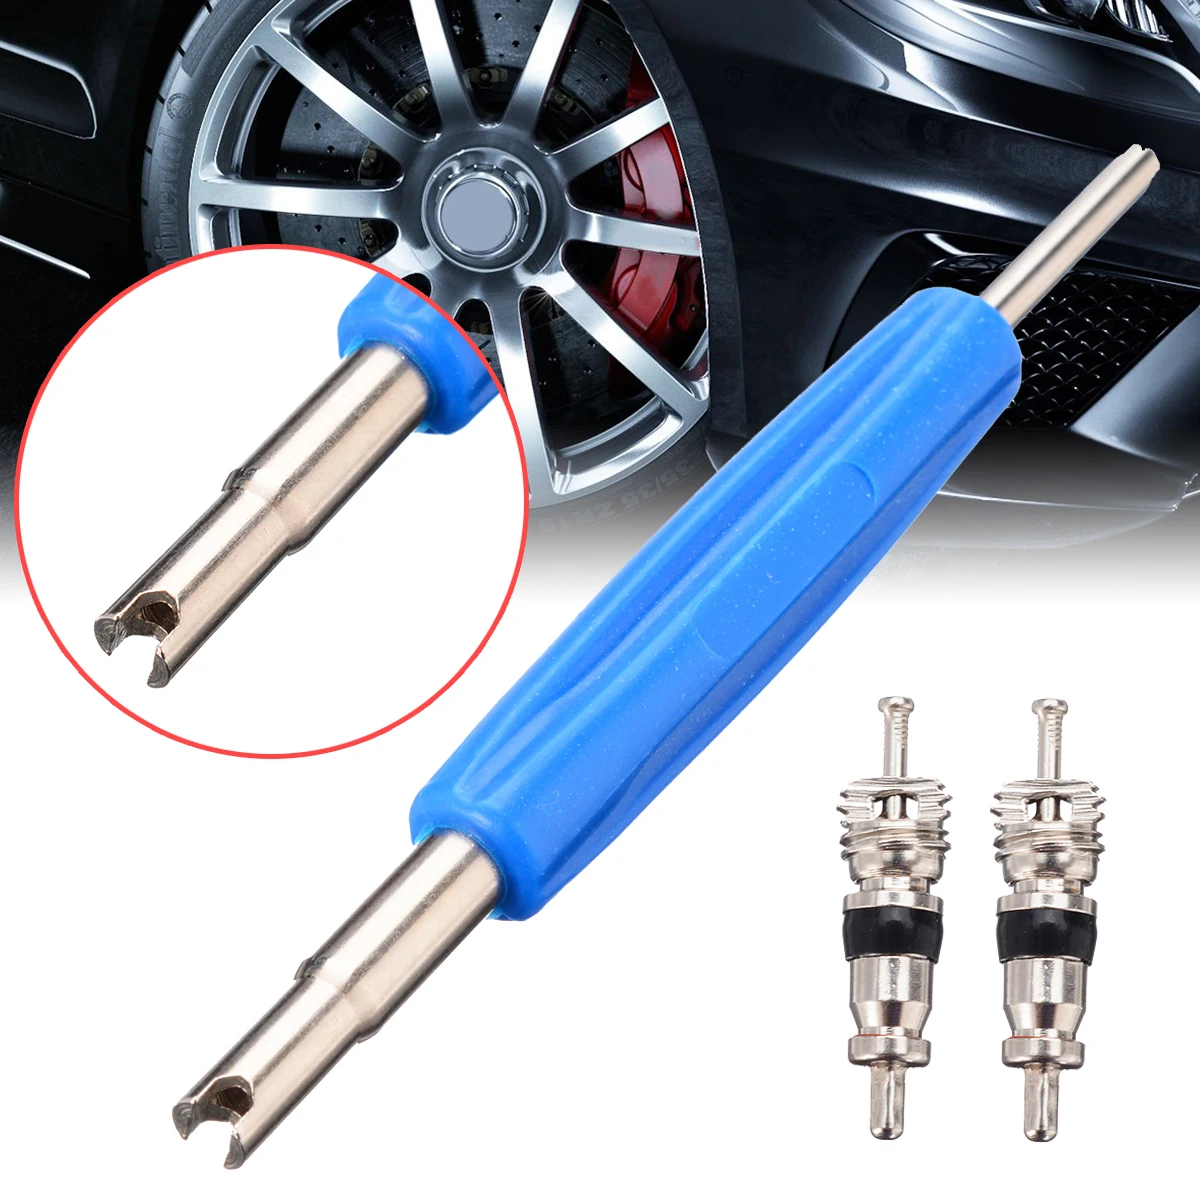 tuankay 10pcs Tyre Valve Cores w/Remover Tool for Schrader Car Bike Motorcycle 